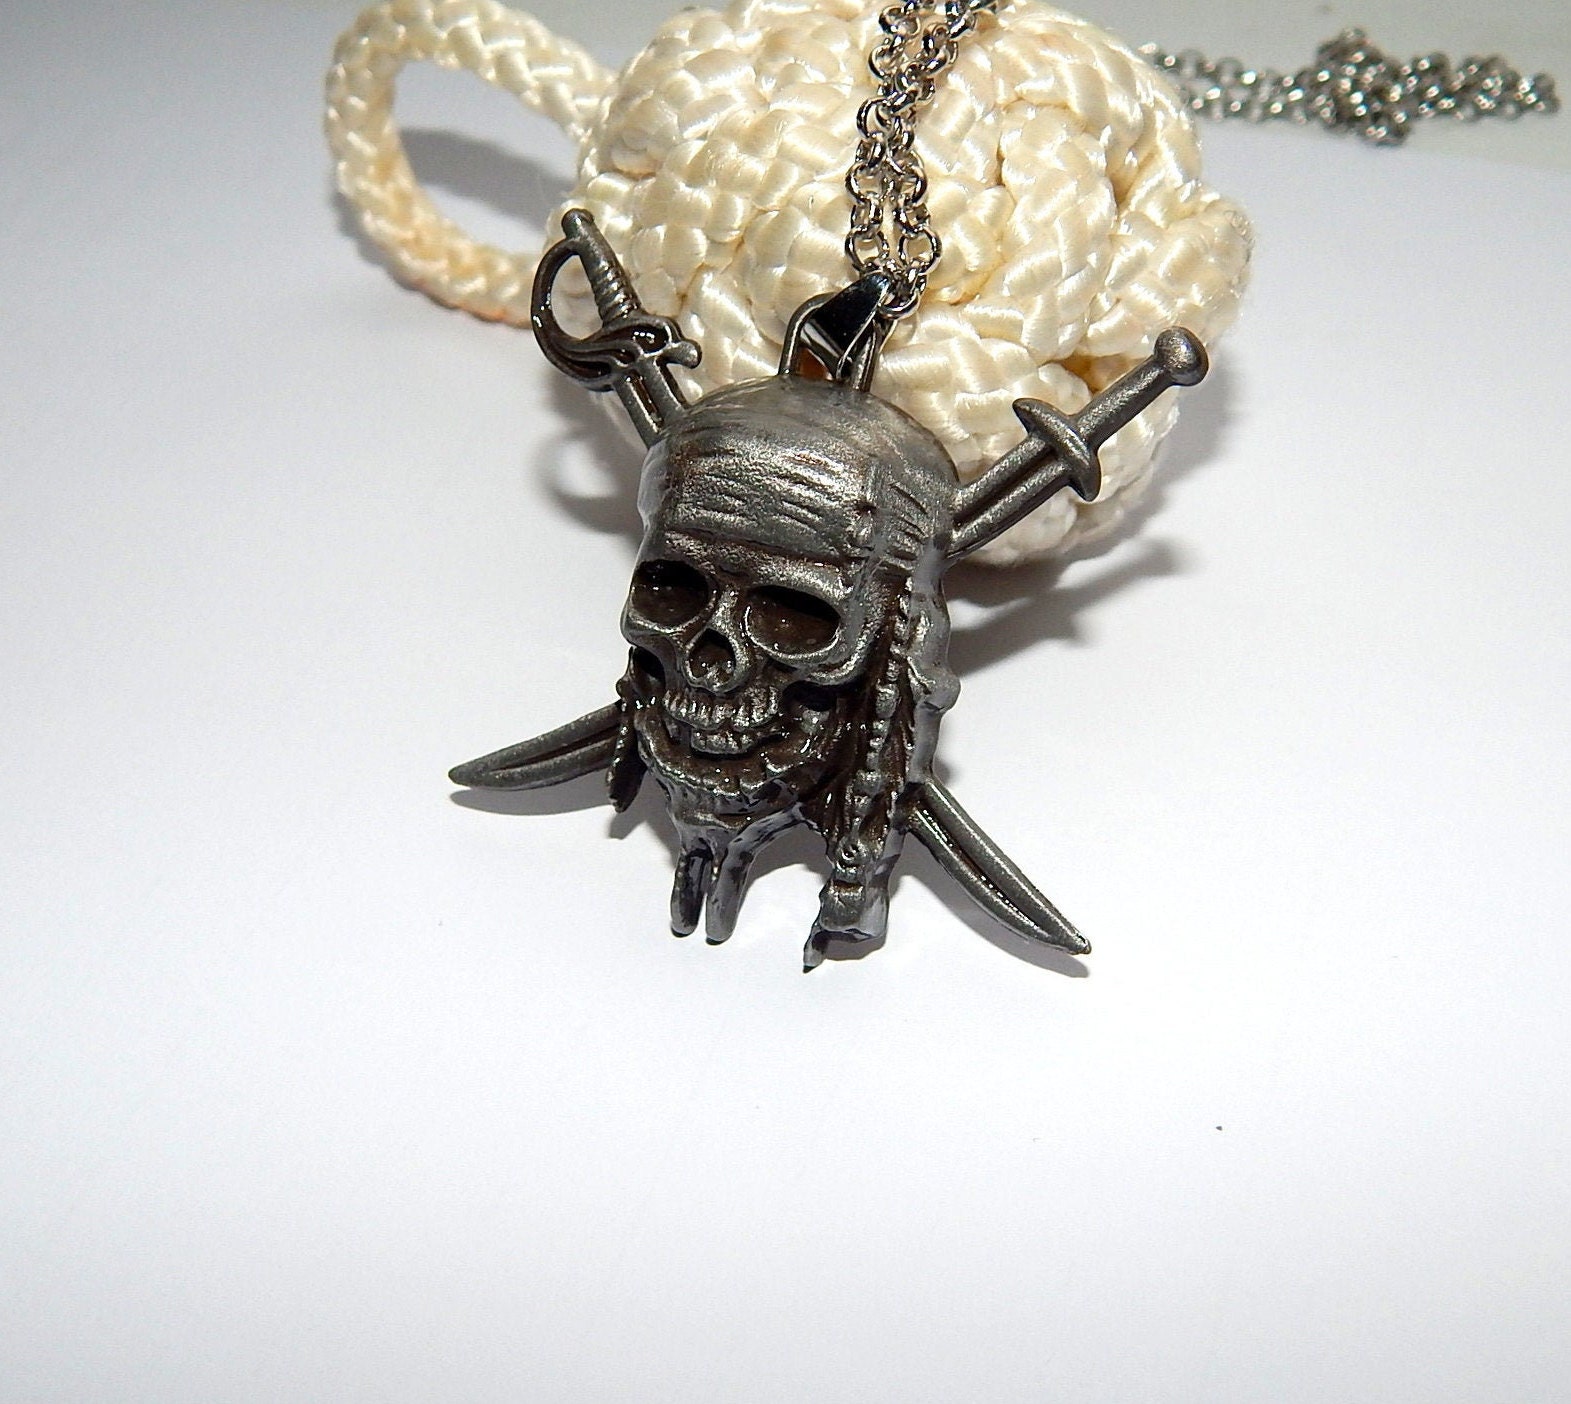 Pirates of Caribbean cursed coin skull pendant sterling silver 925-handicraft 